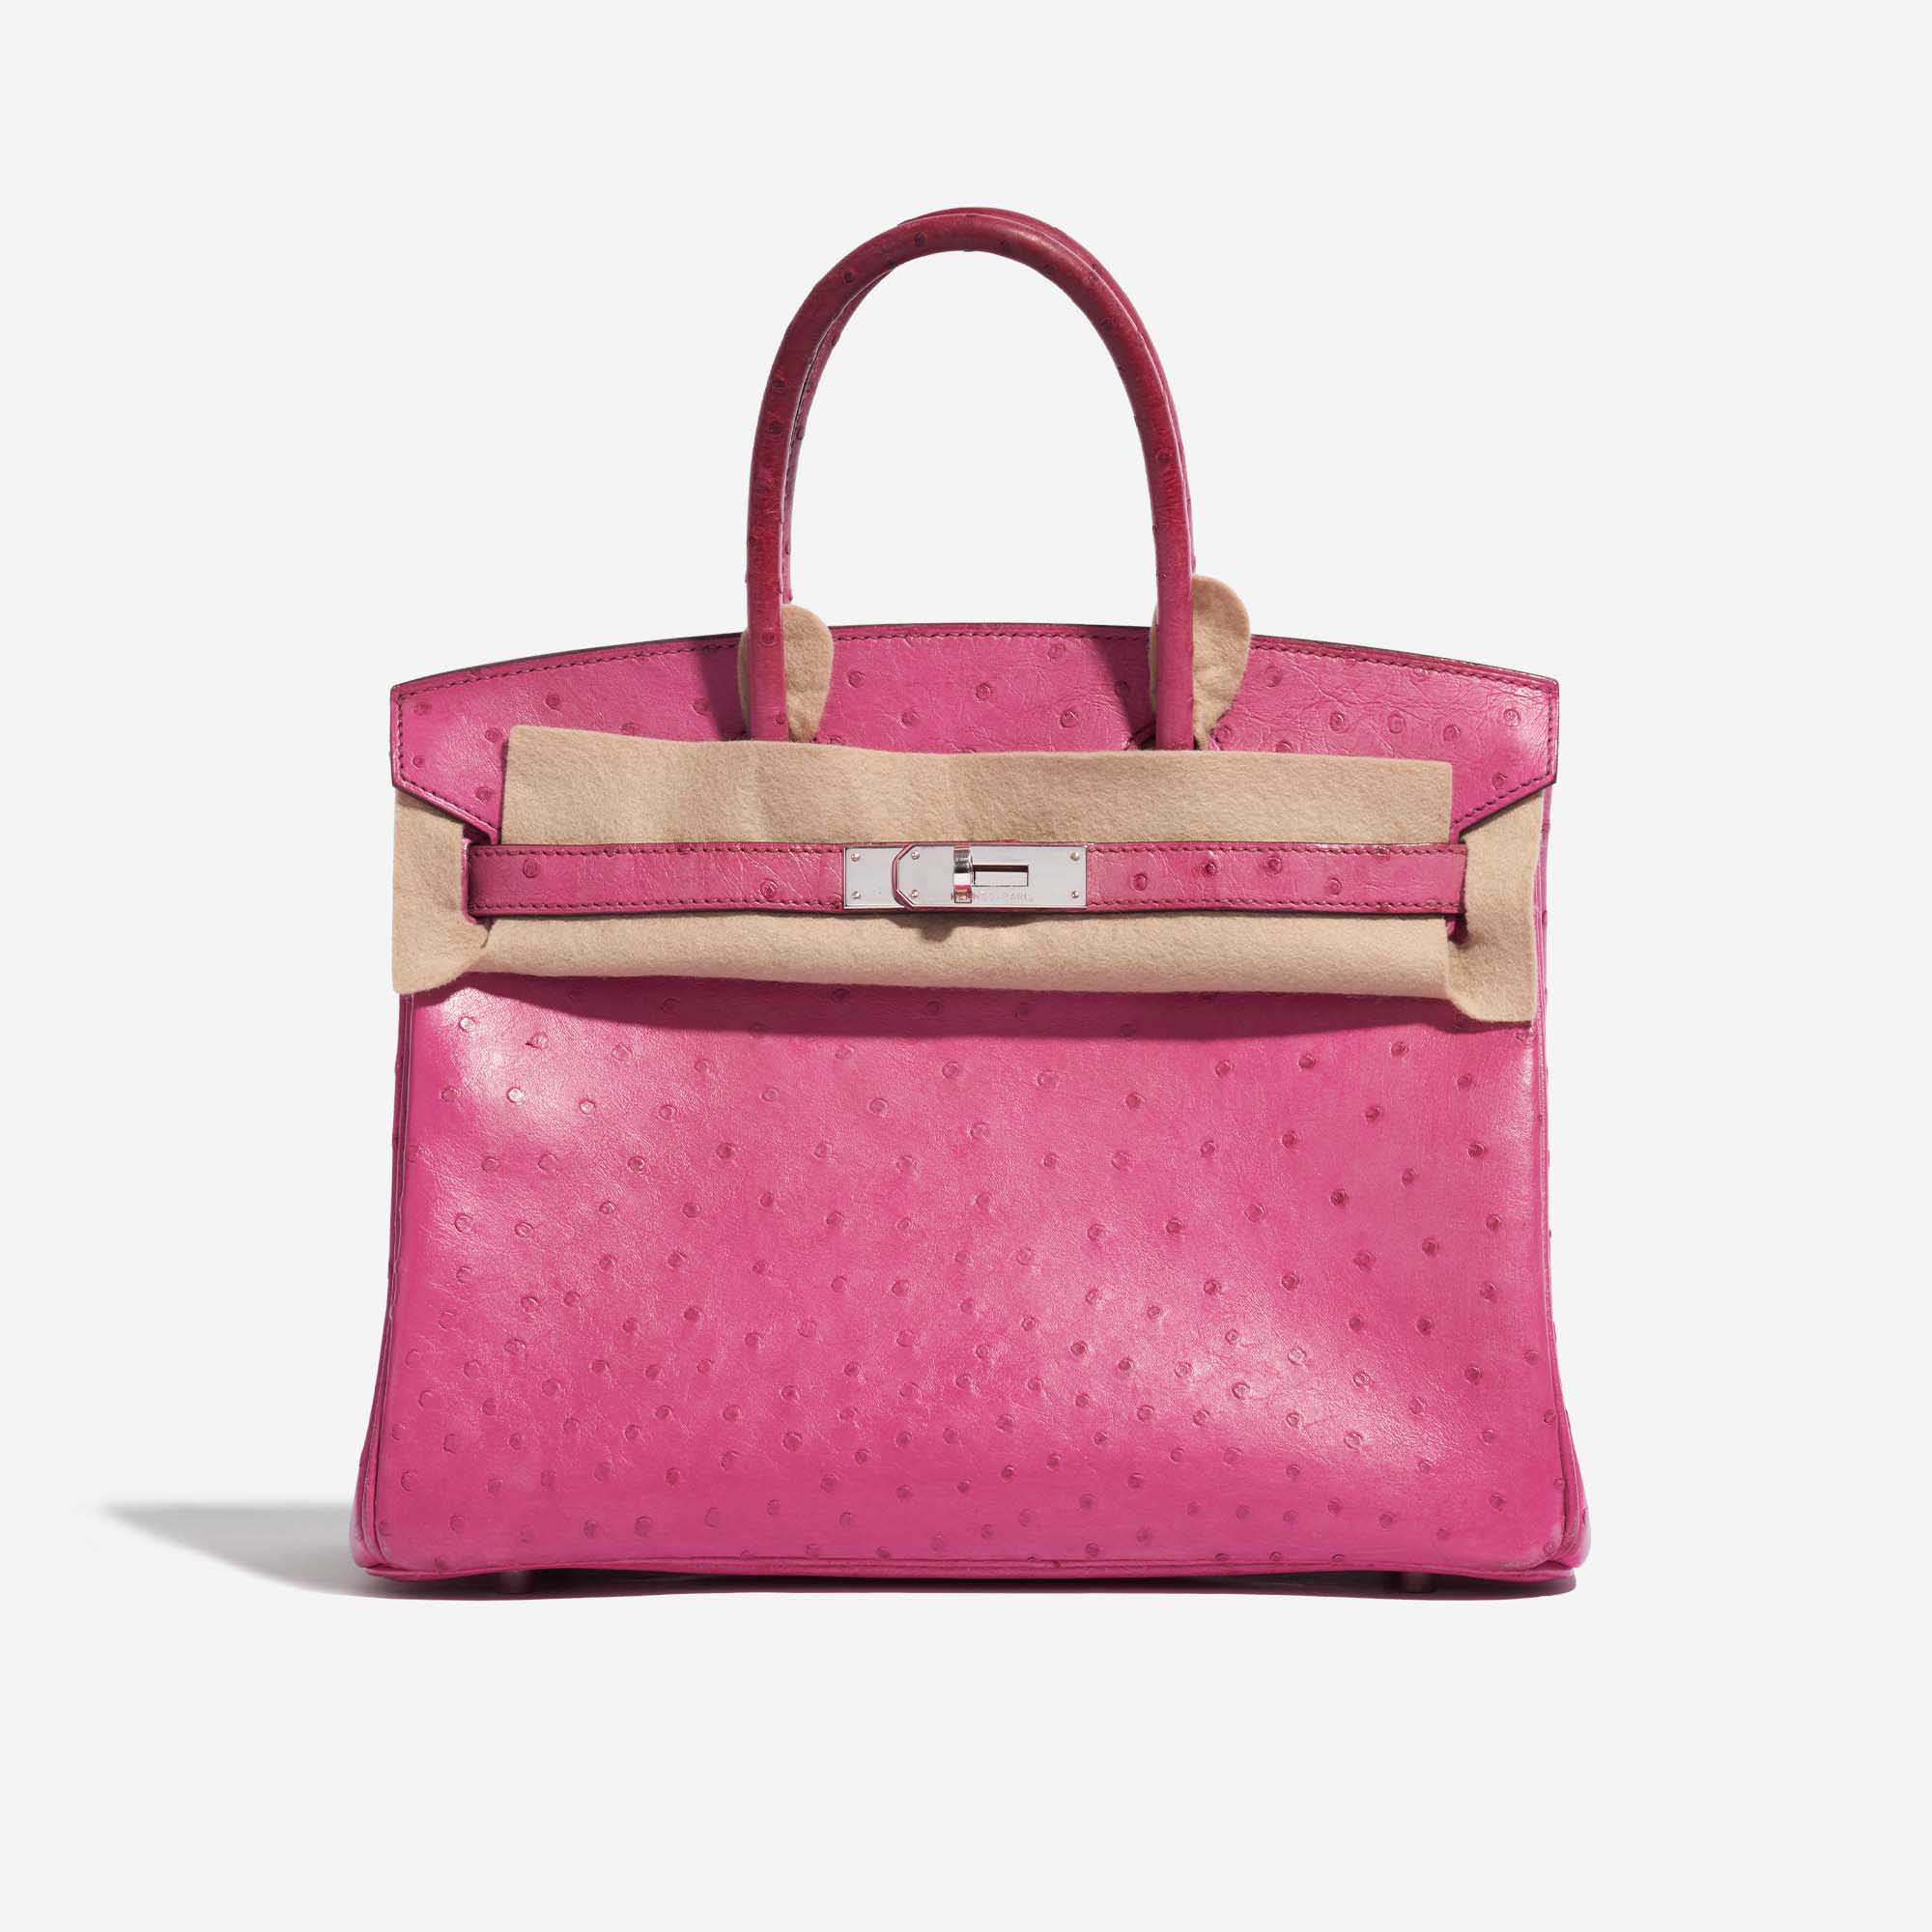 Hermès - Authenticated Picotin Handbag - Leather Pink for Women, Never Worn